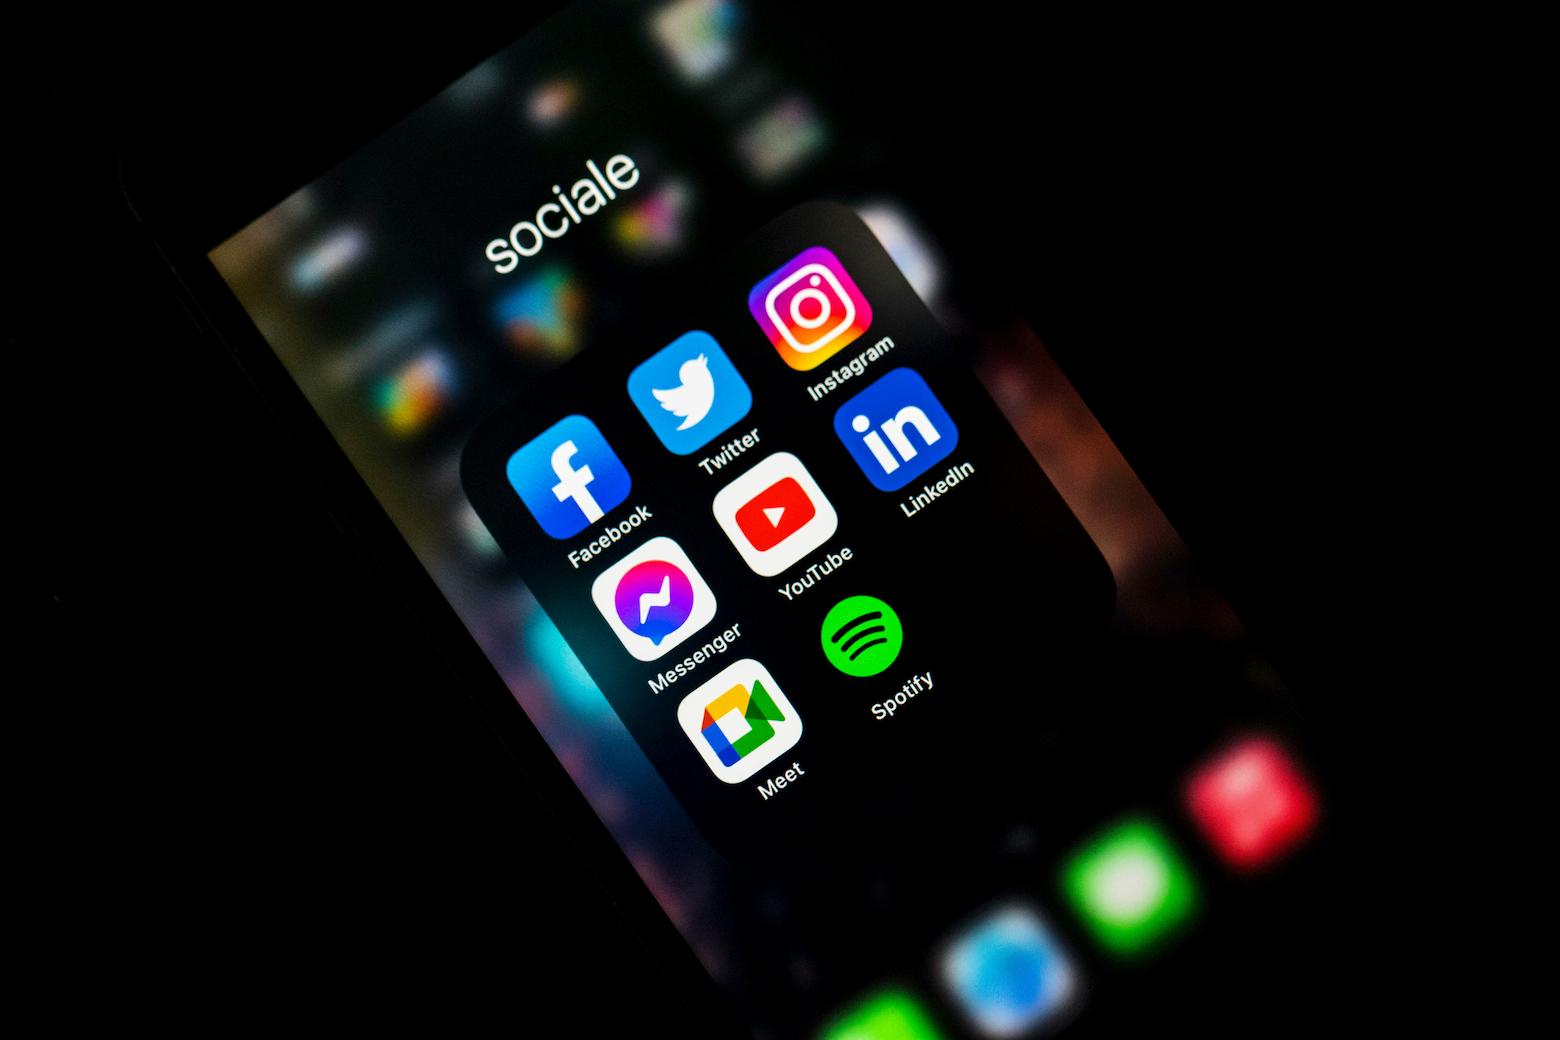 A phone's screen showing social media apps installed on it, such as facebook, twitter, instagram, linkedin, and more.